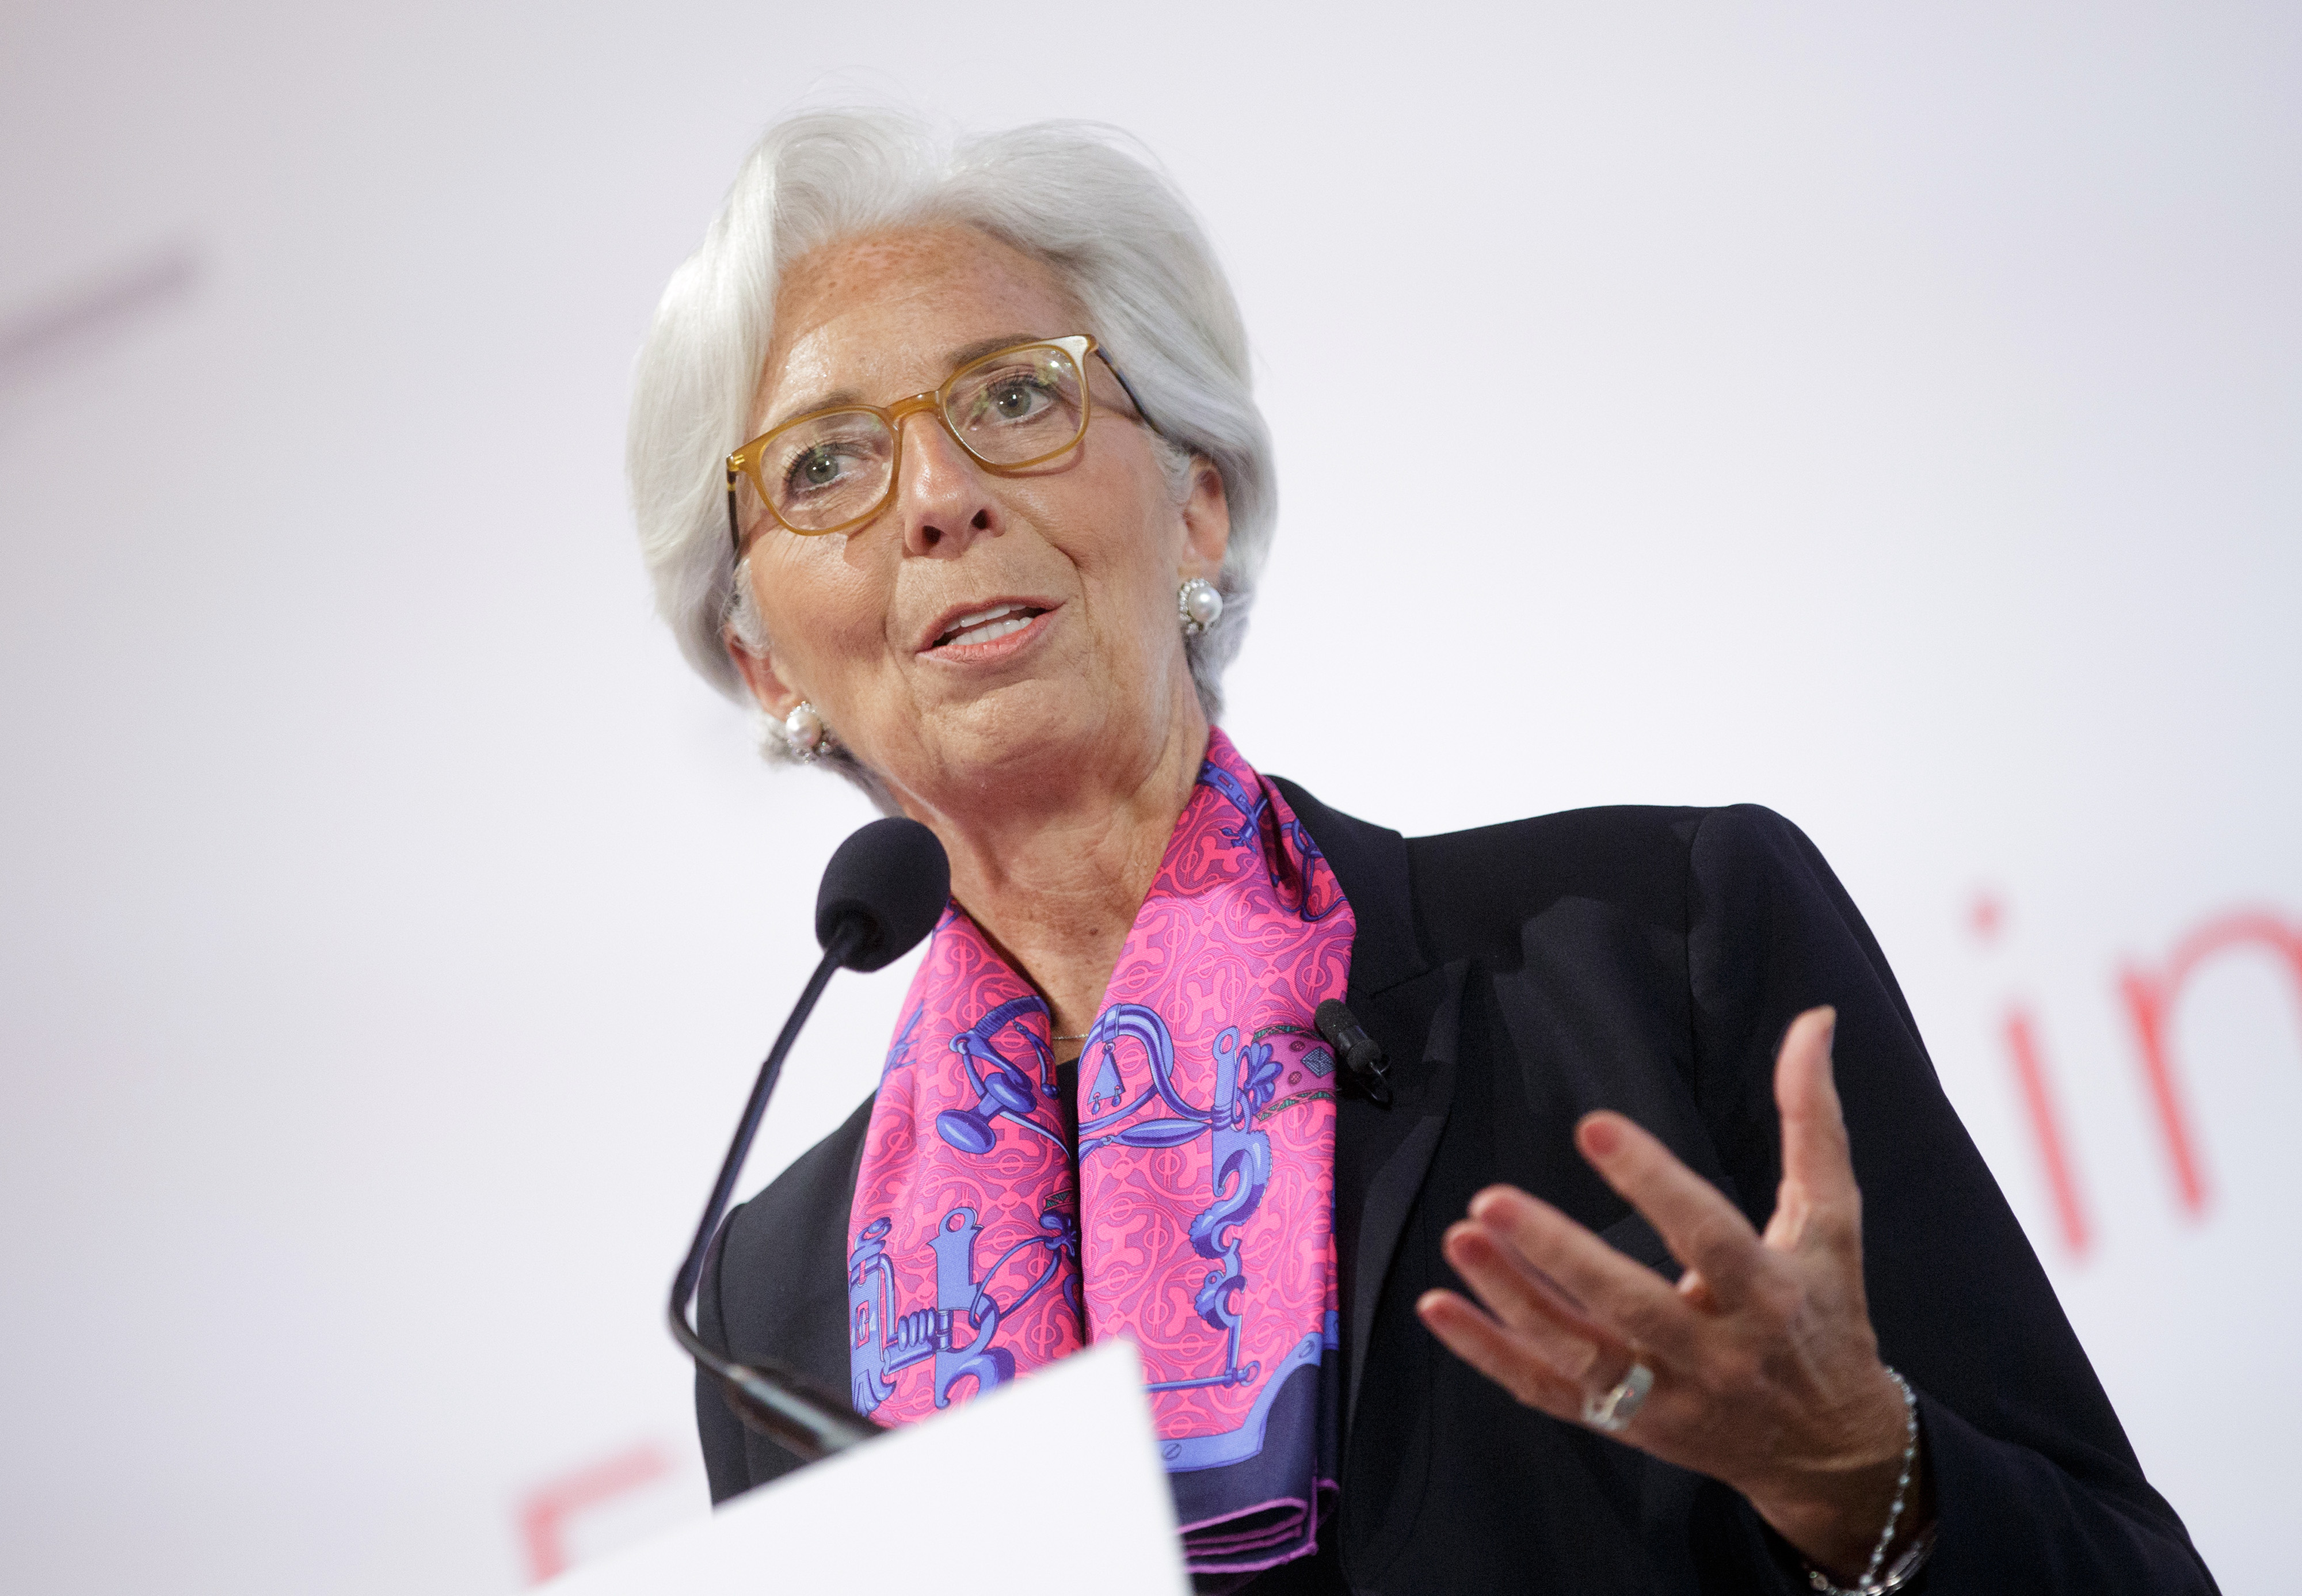 Christine Lagarde, managing director of the International Monetary Fund (IMF), gestures as she speaks during a panel session at the Hofburg Palace in Vienna, Austria, on June 17, 2016. (Bloomberg_Bloomberg via Getty Images)